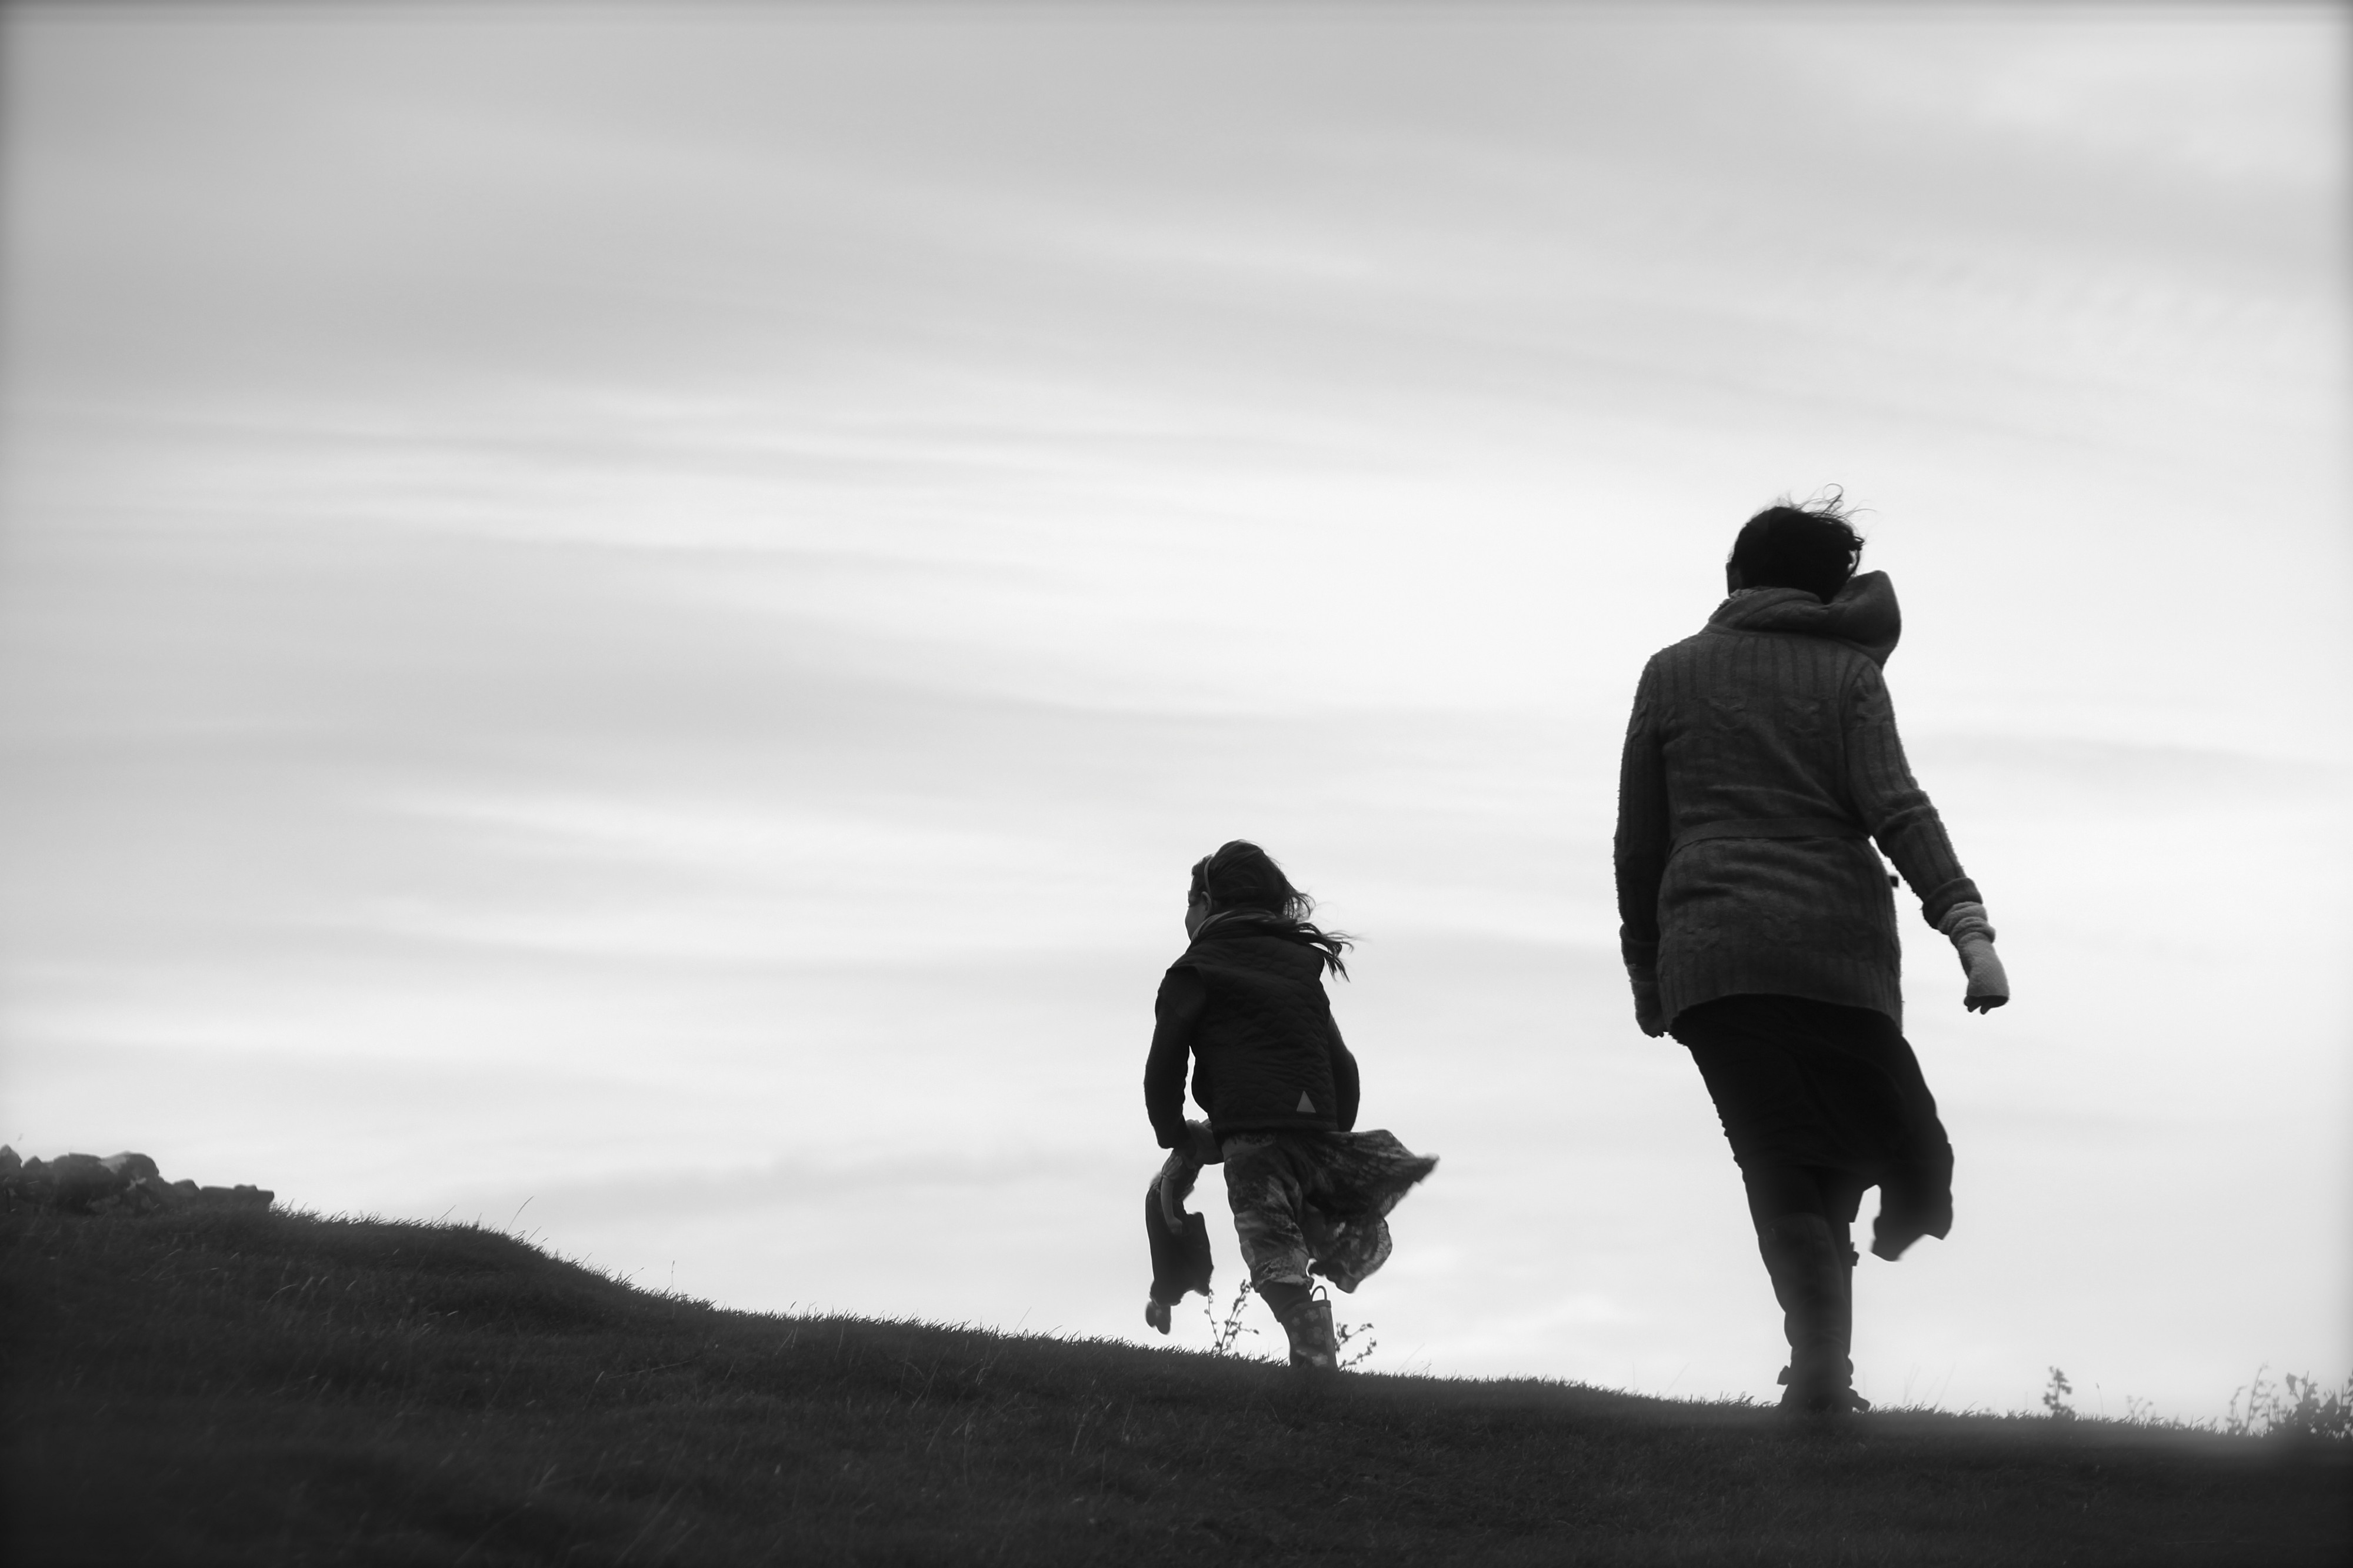 Black and white image of mother and daughter walking up hillside in silhouette.